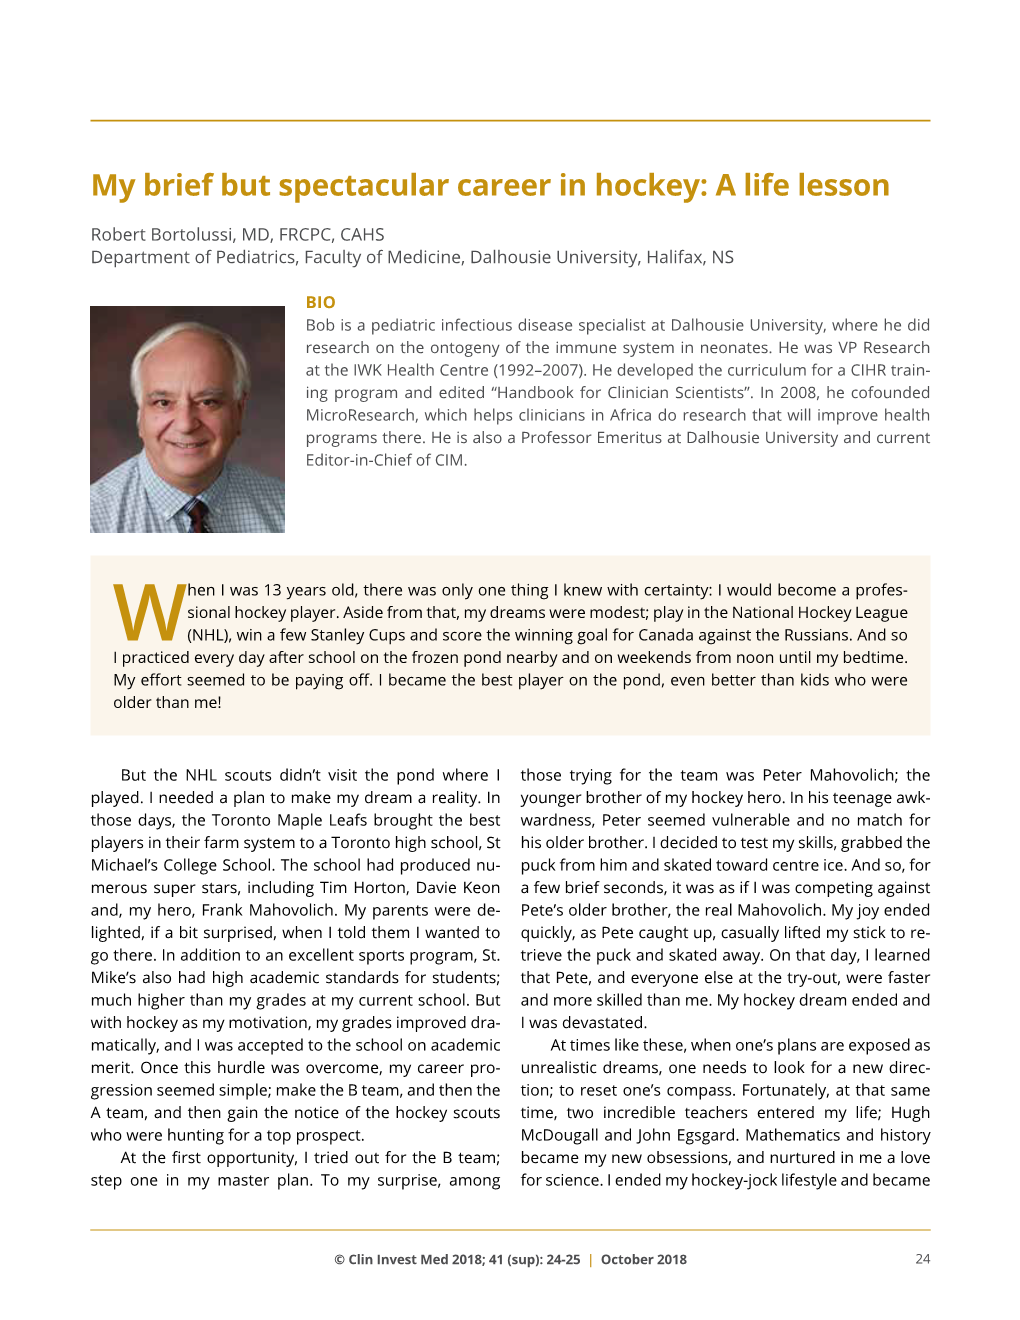 My Brief but Spectacular Career in Hockey: a Life Lesson